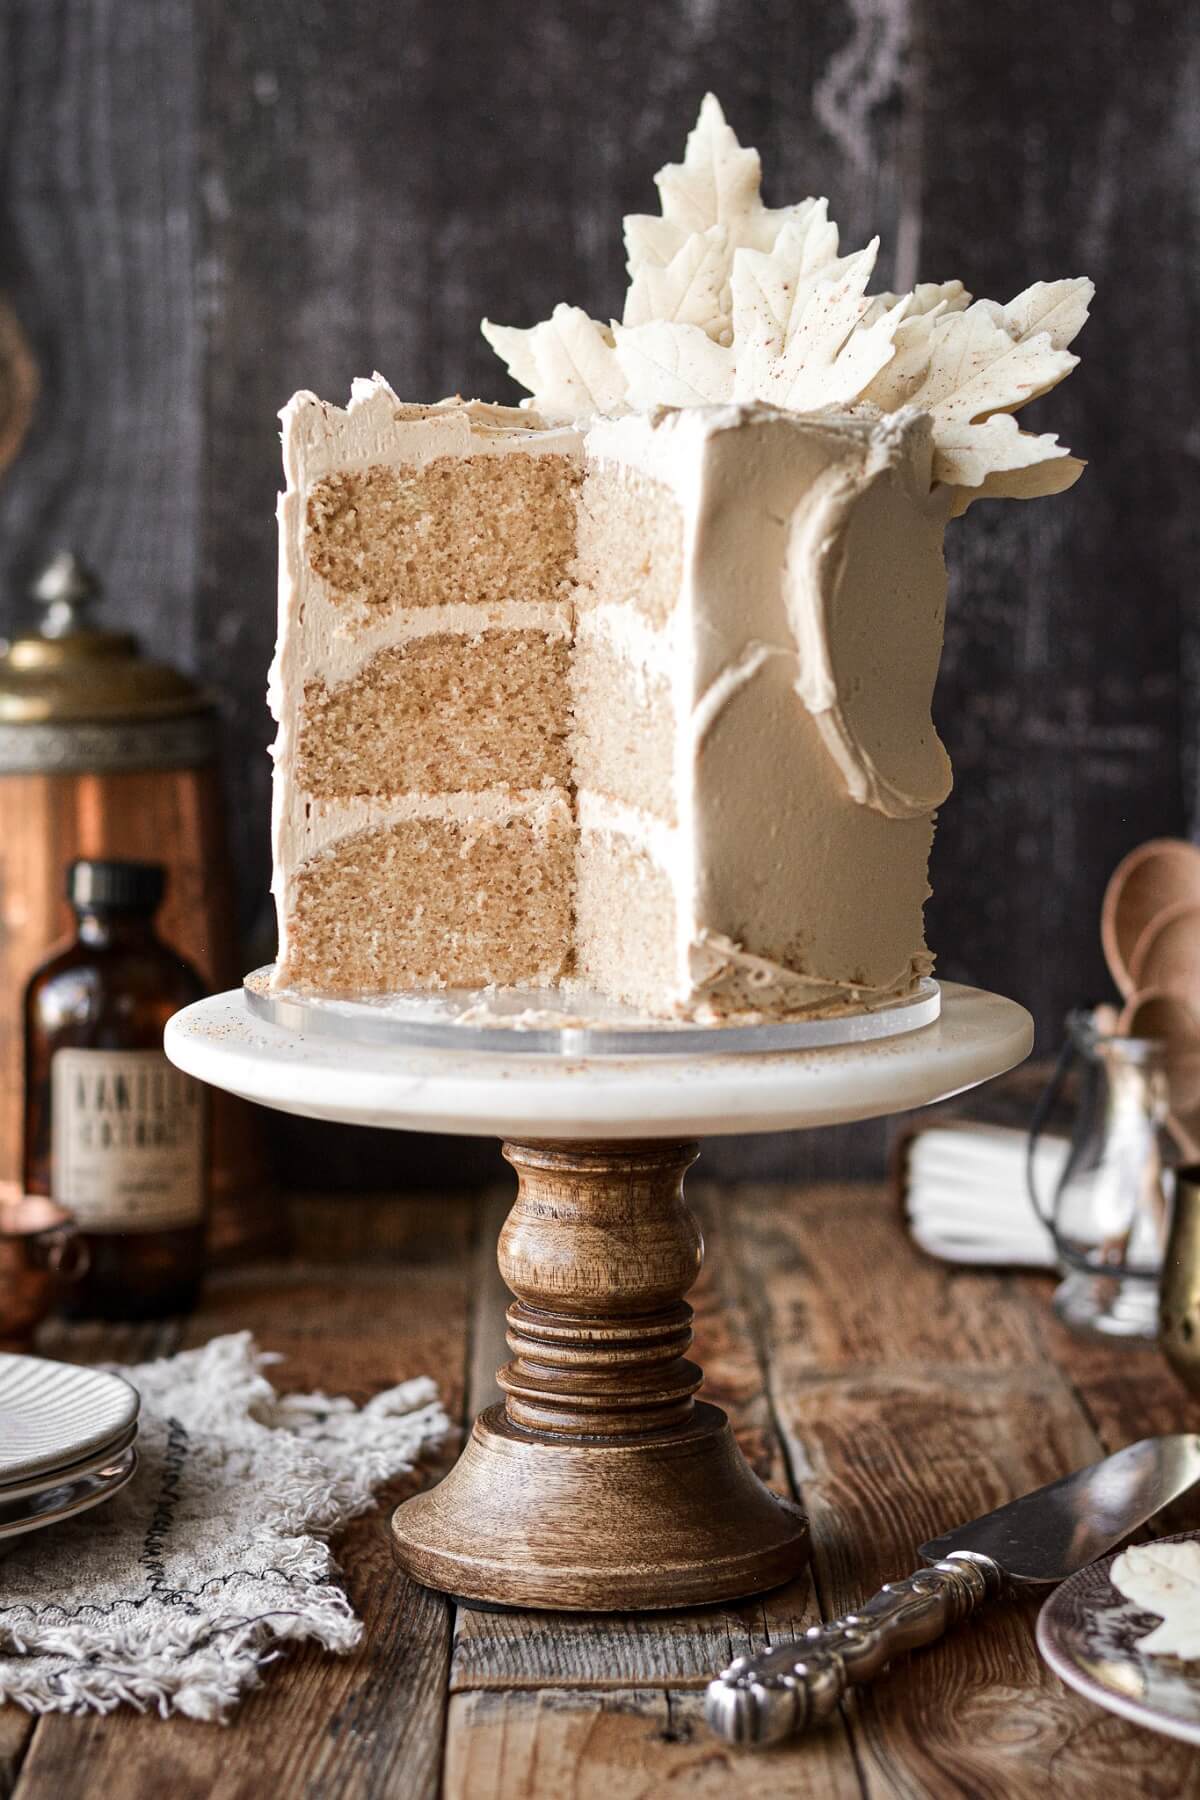 White chocolate maple spice cake with white chocolate leaves, with a slice cut.